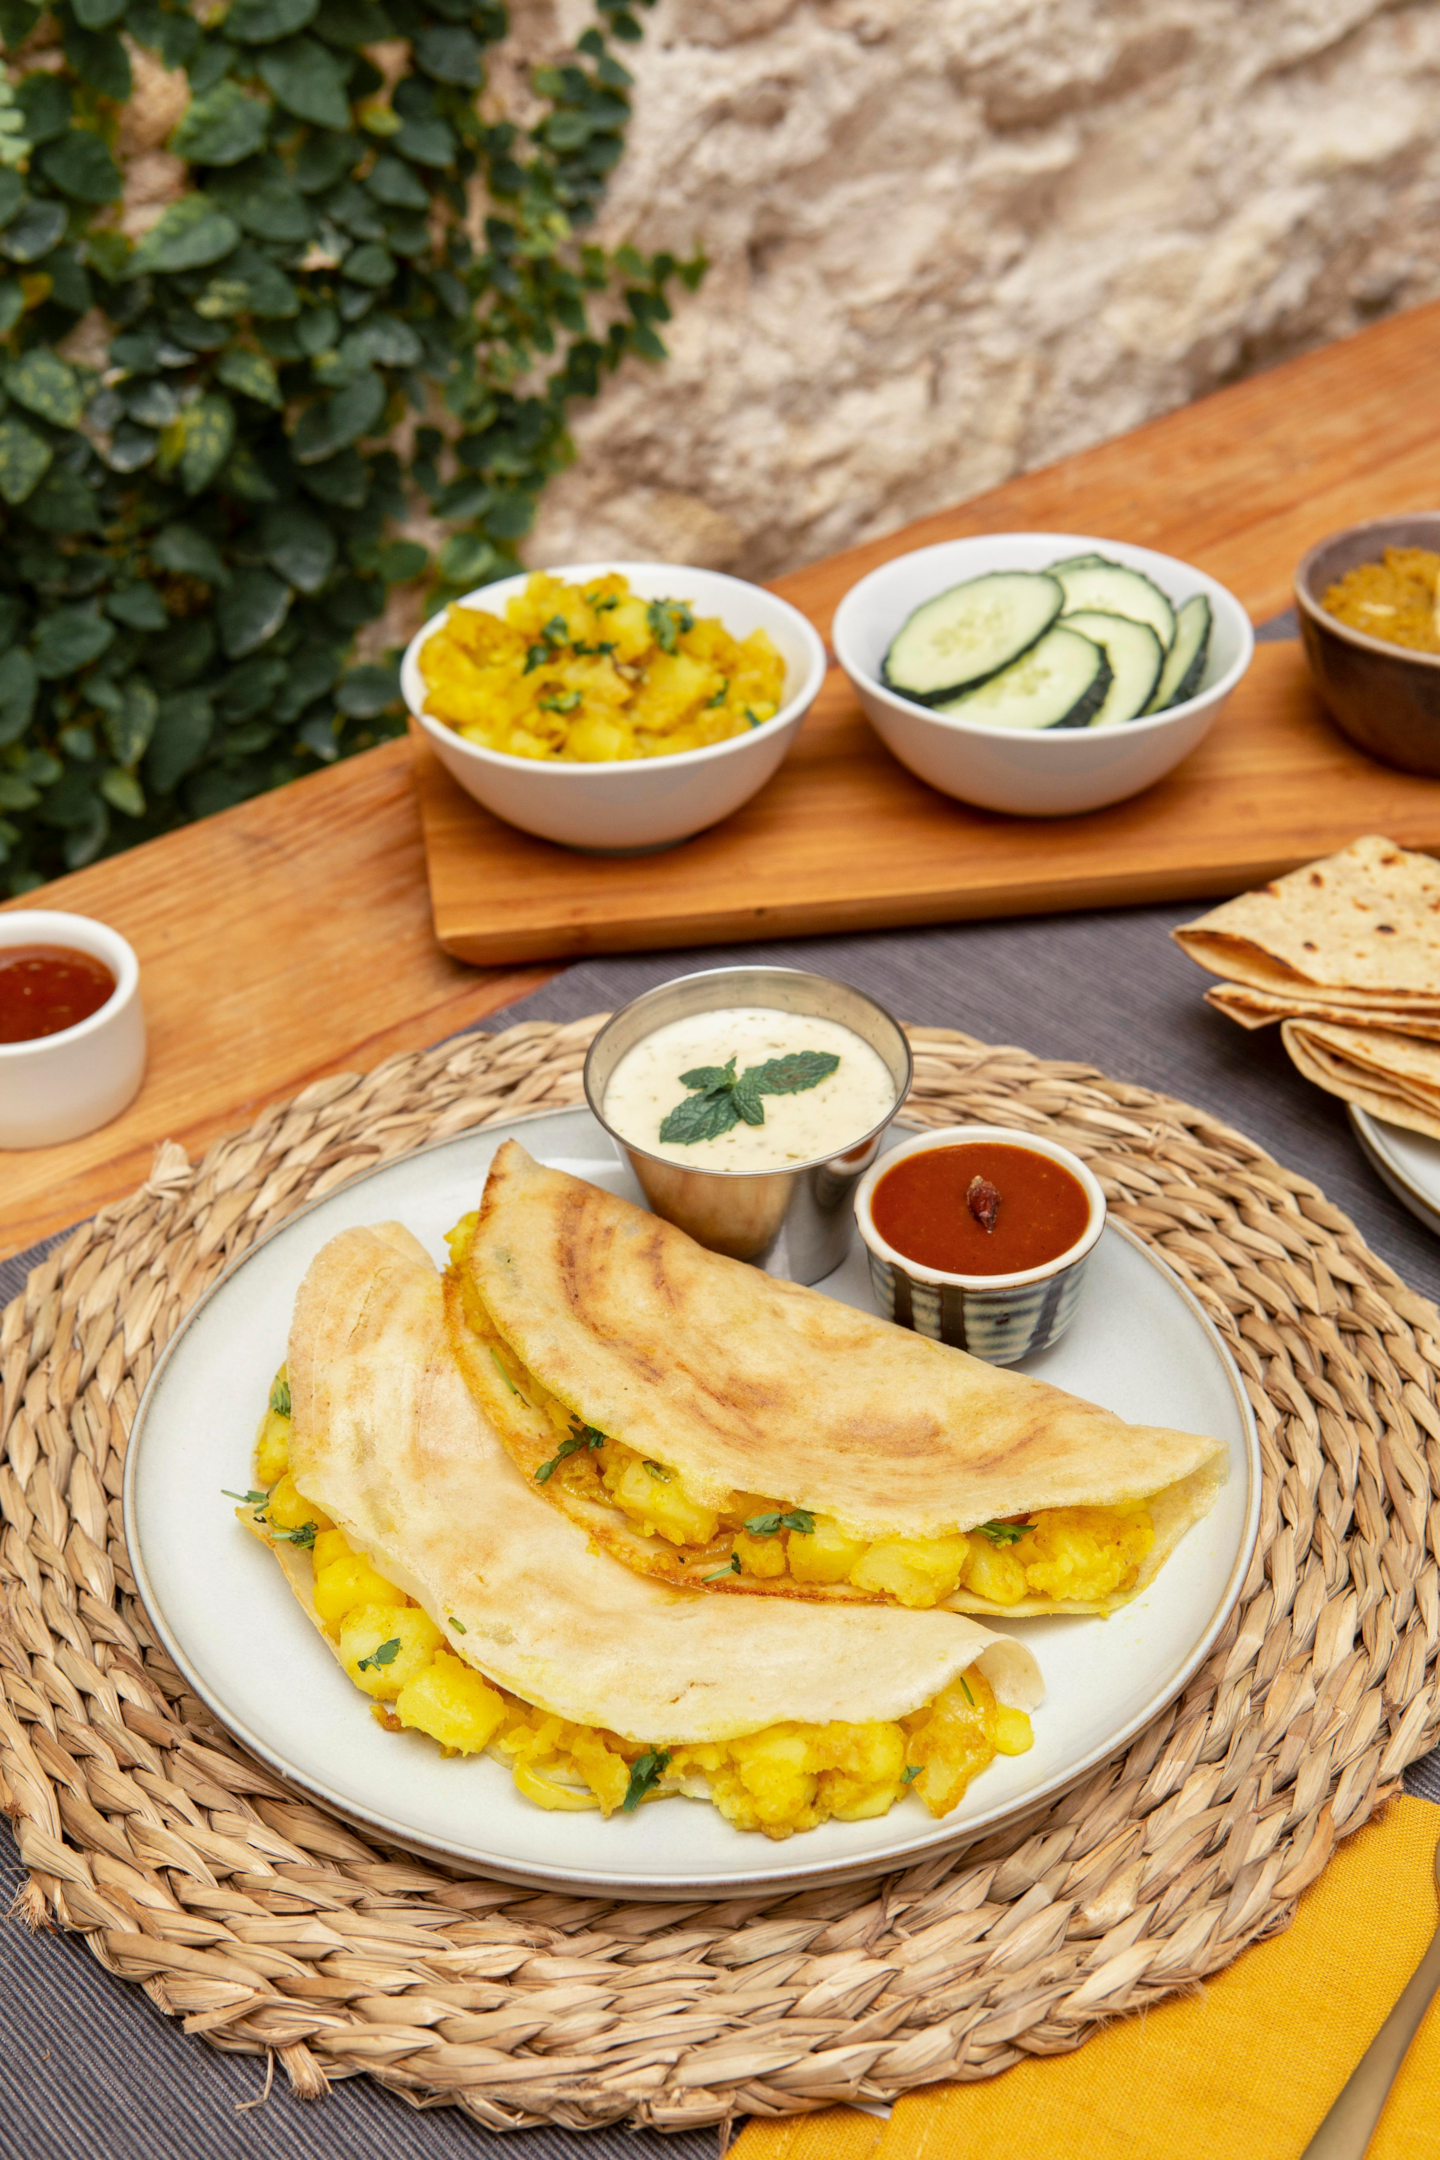 Dosa: Traditional South Indian crepe served with chutney and sambar.